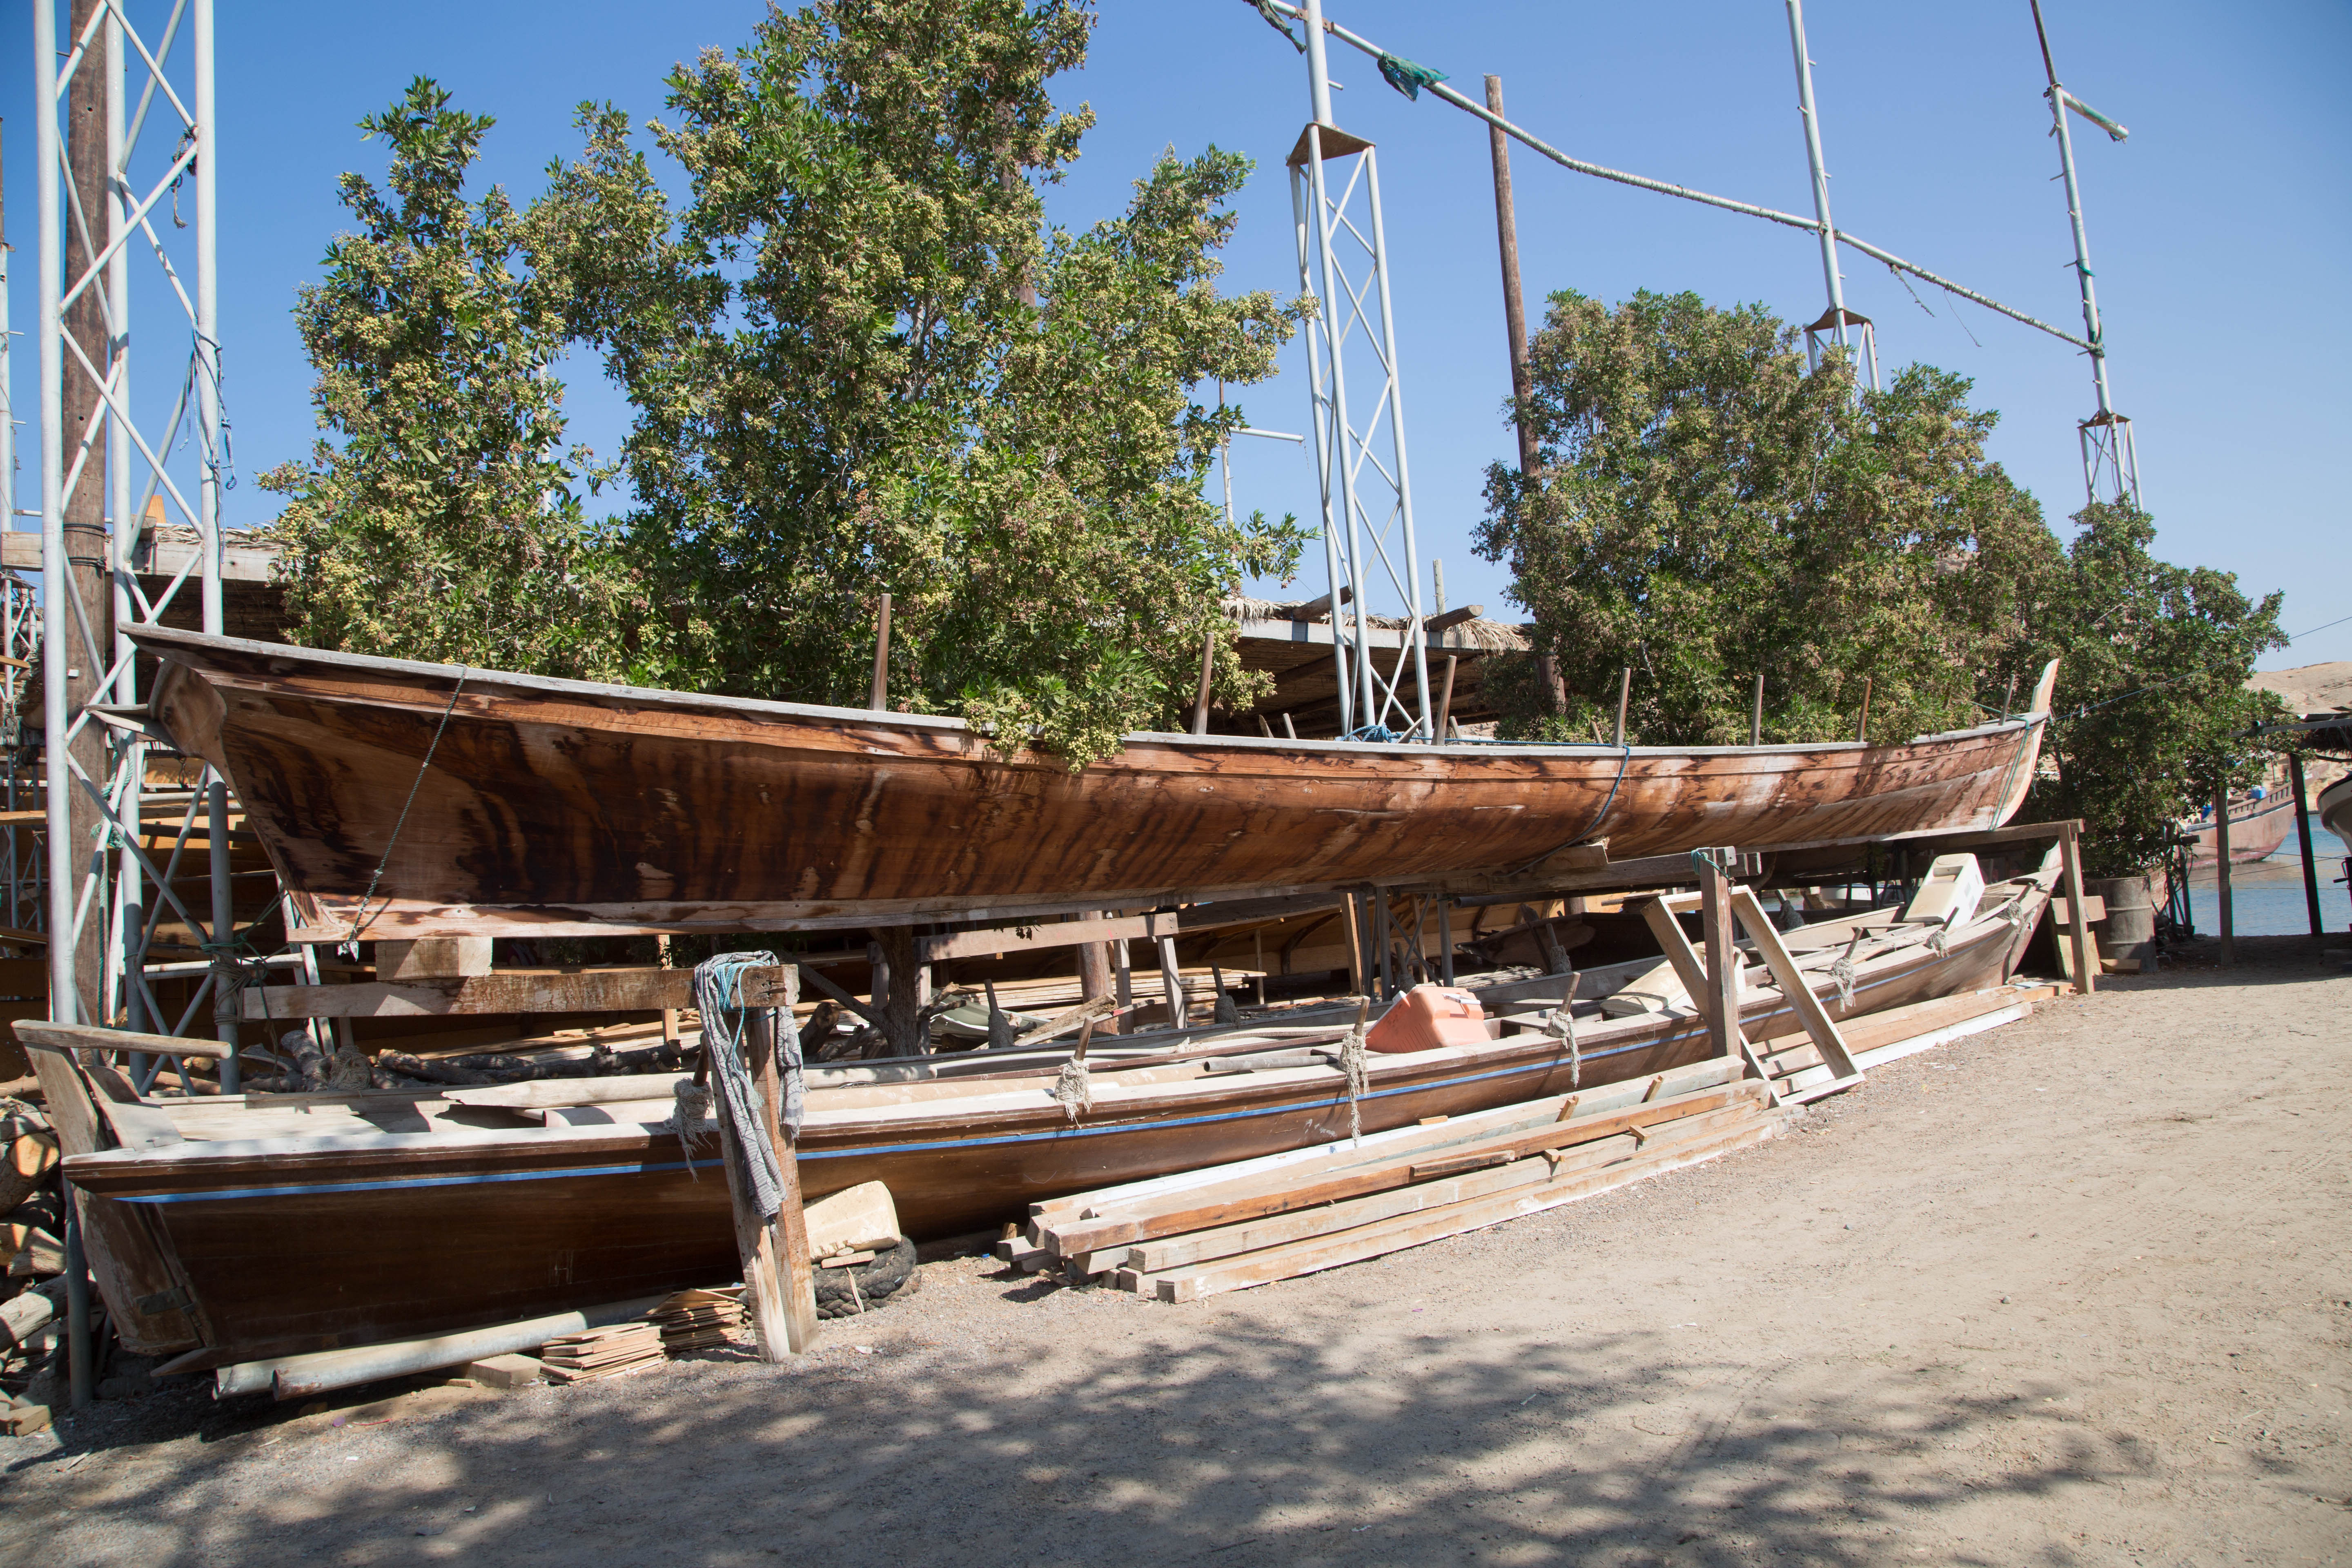 Oman Travel: Visit traditional boat factory in Sur